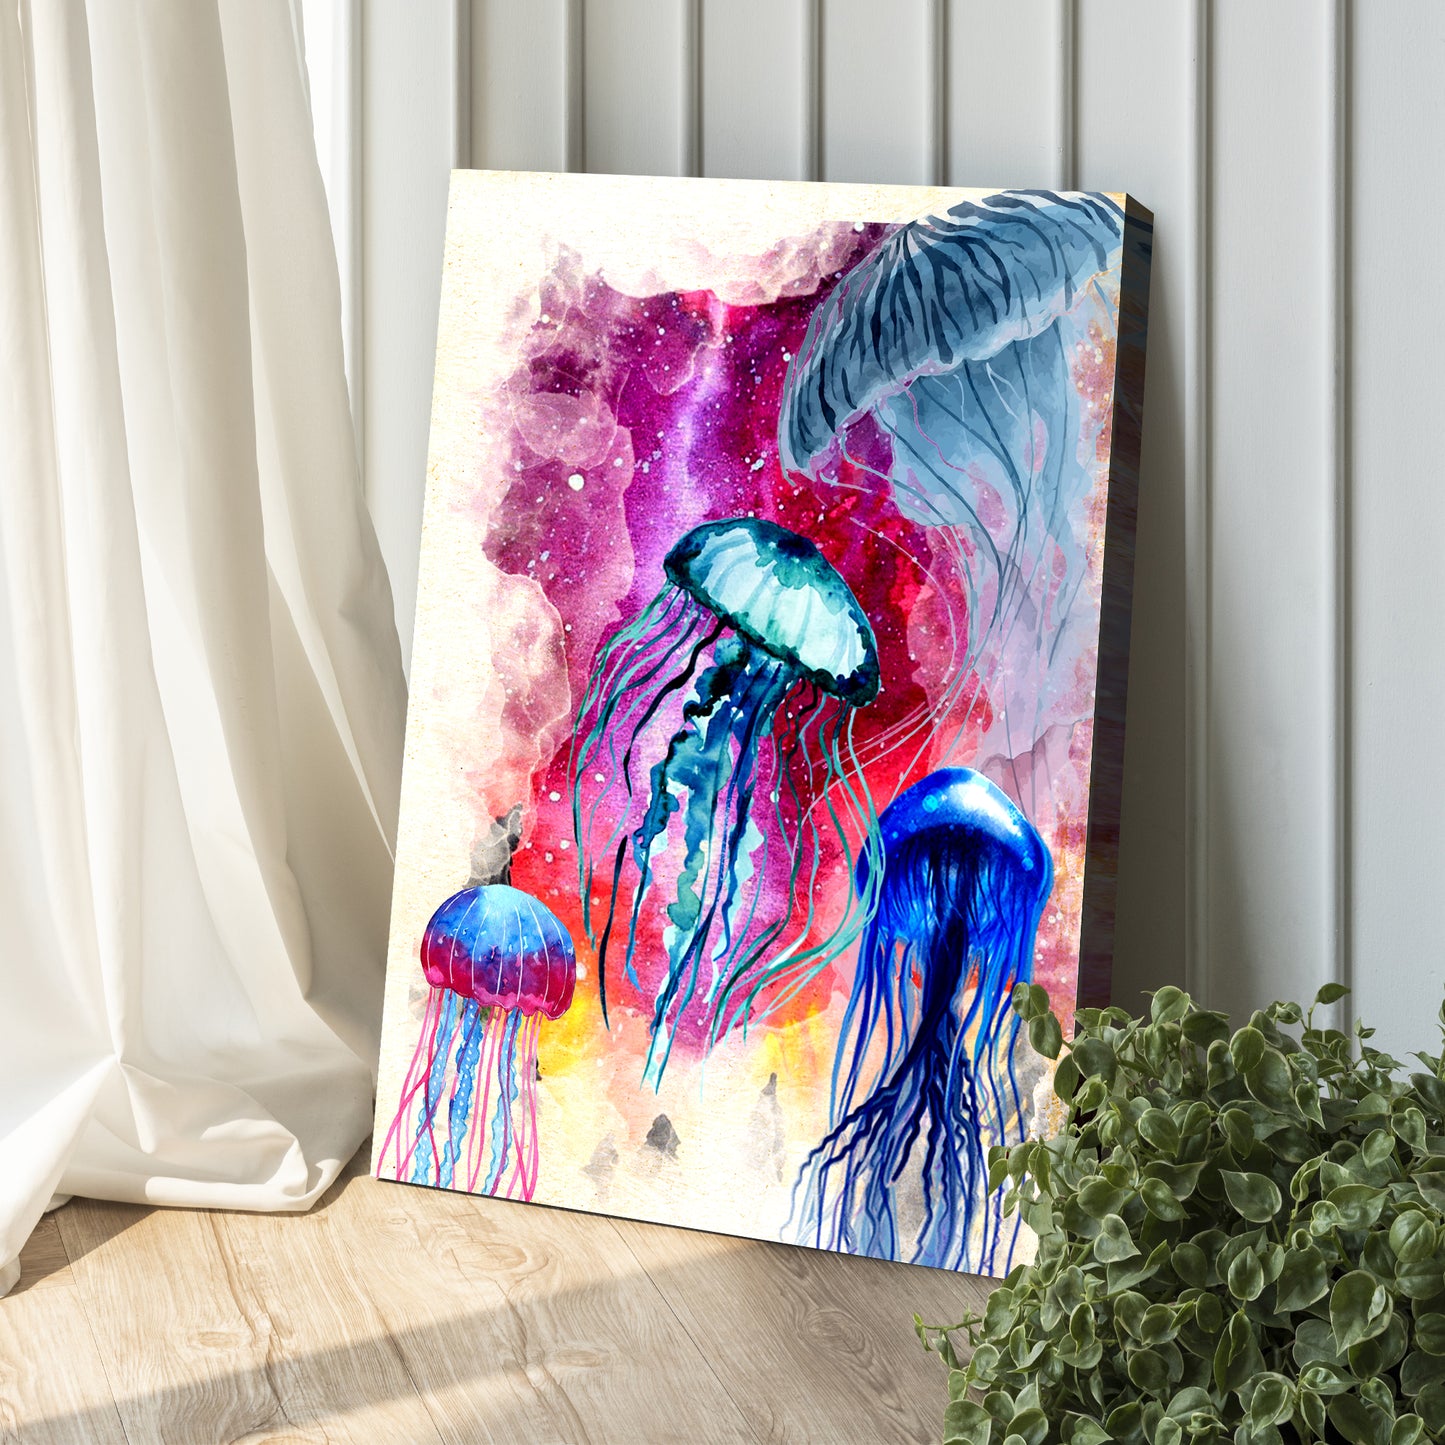 Galaxy Jellyfish Watercolor Portrait Canvas Wall Art Style 2 - Image by Tailored Canvases